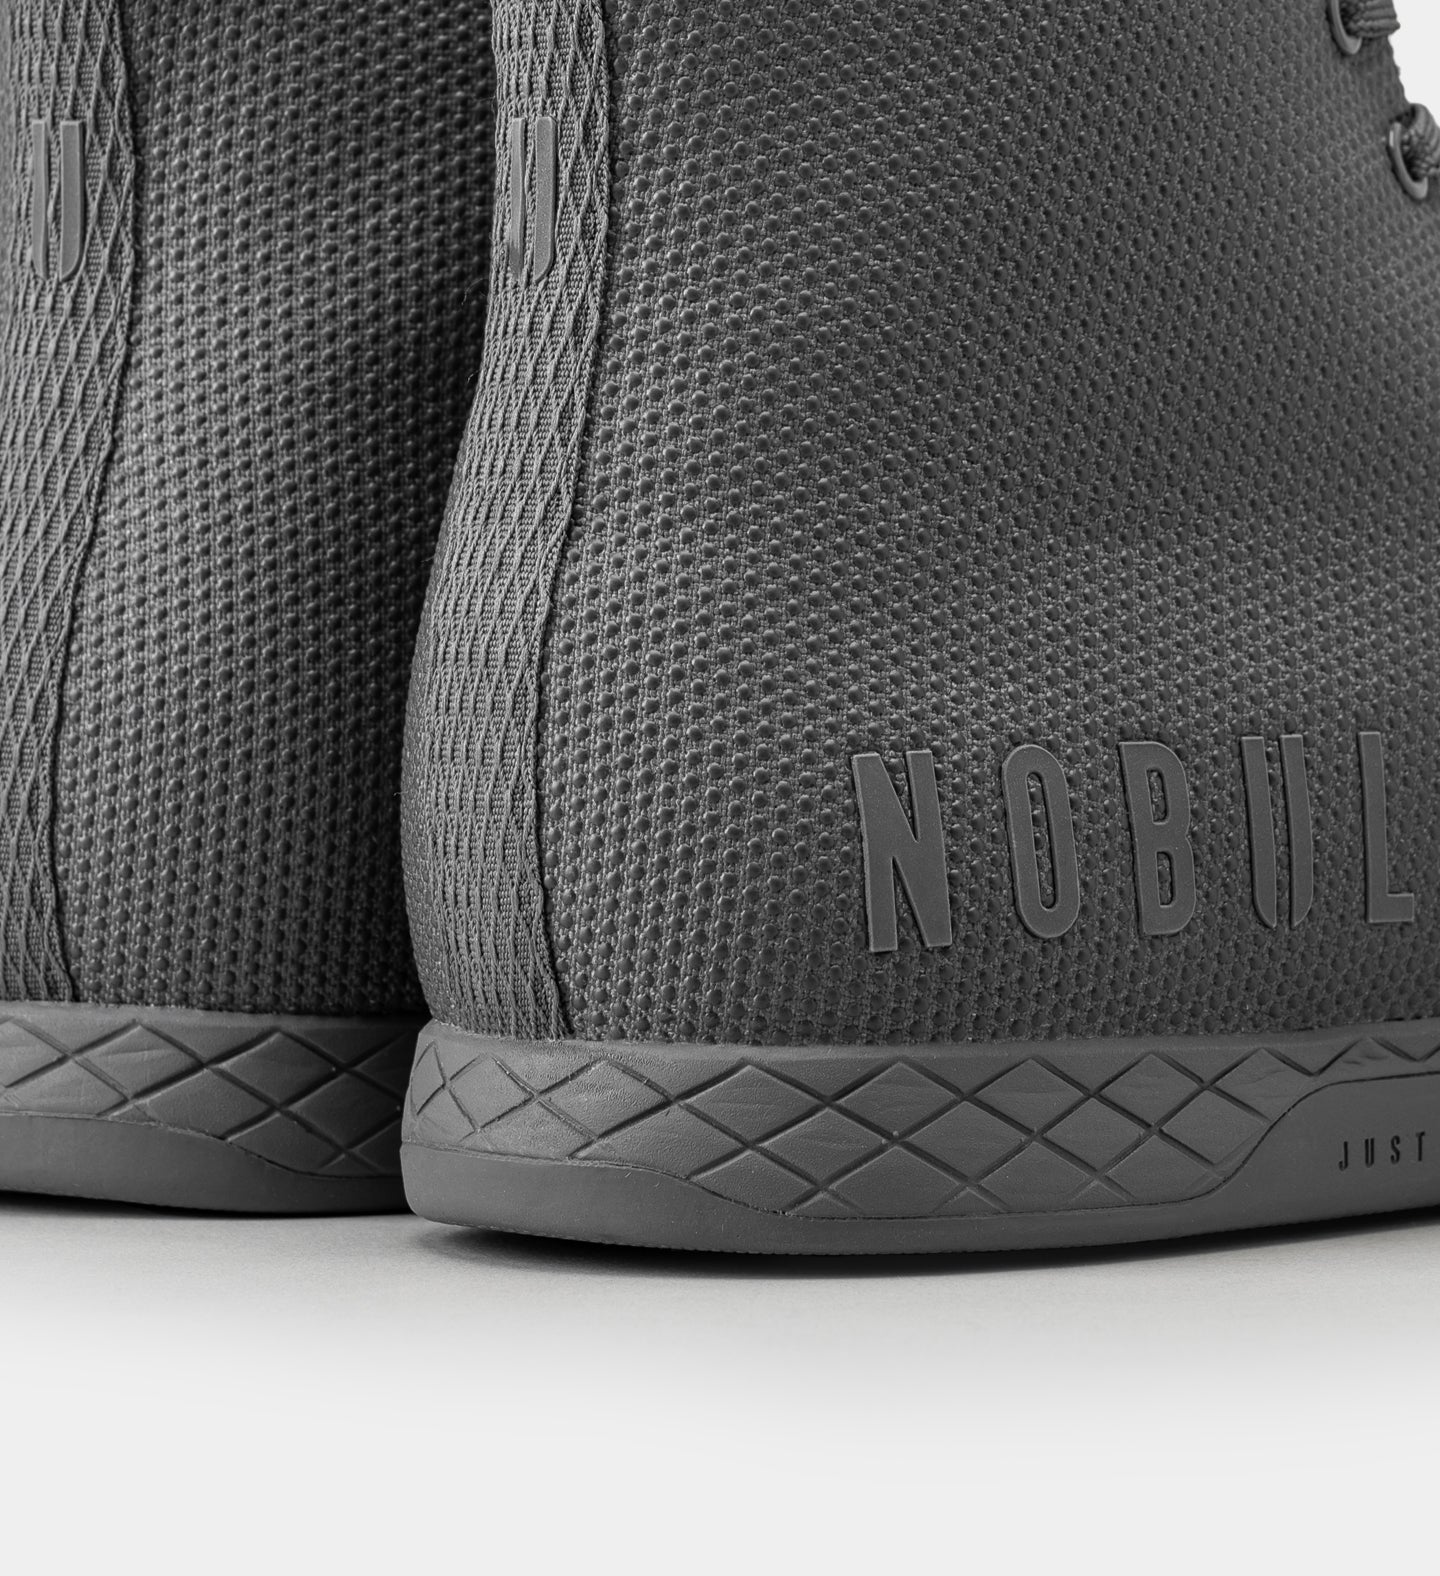 NOBULL High-Top Trainer Shoes